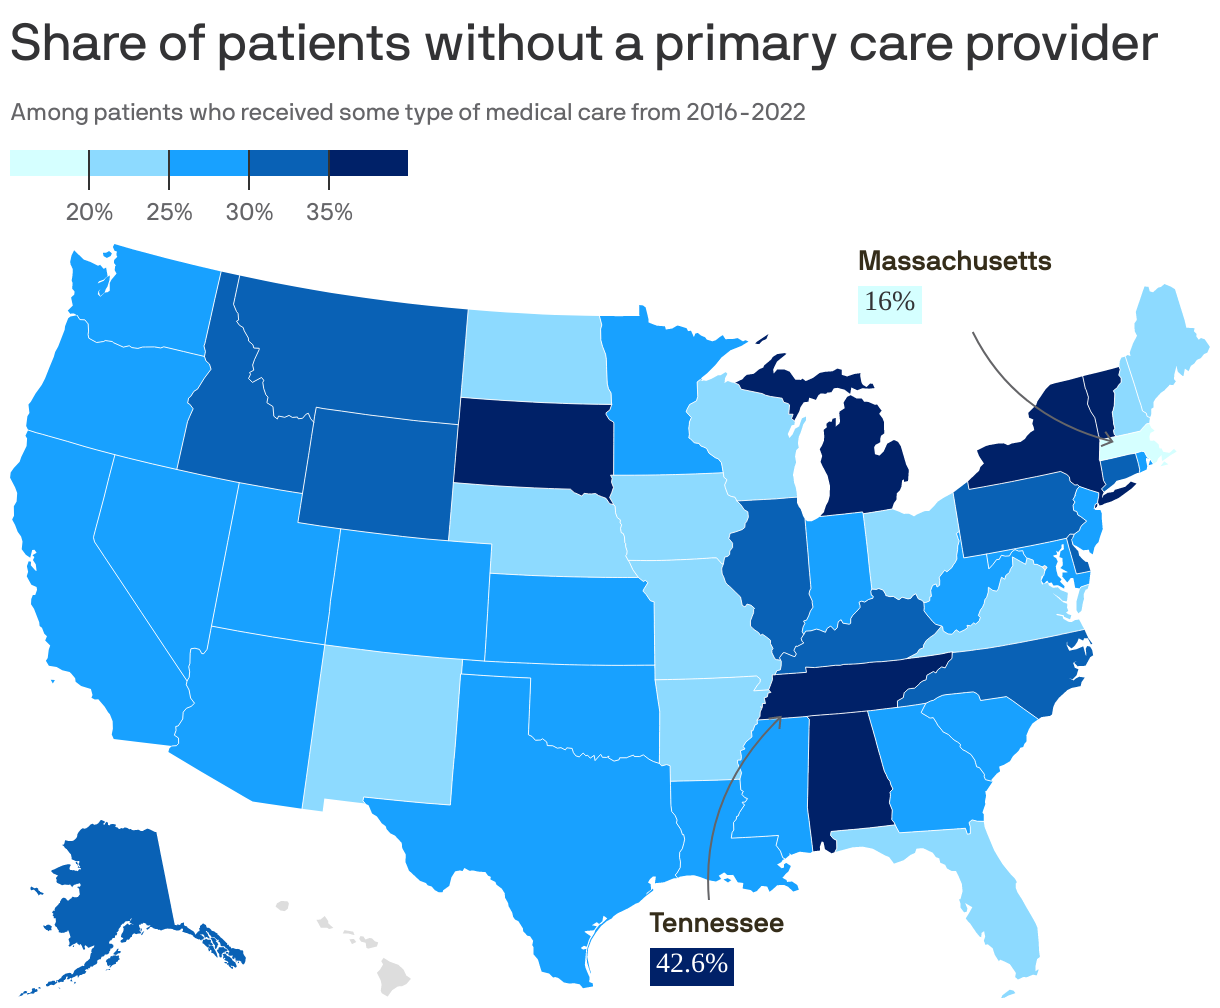 Share of patients without a primary care provider